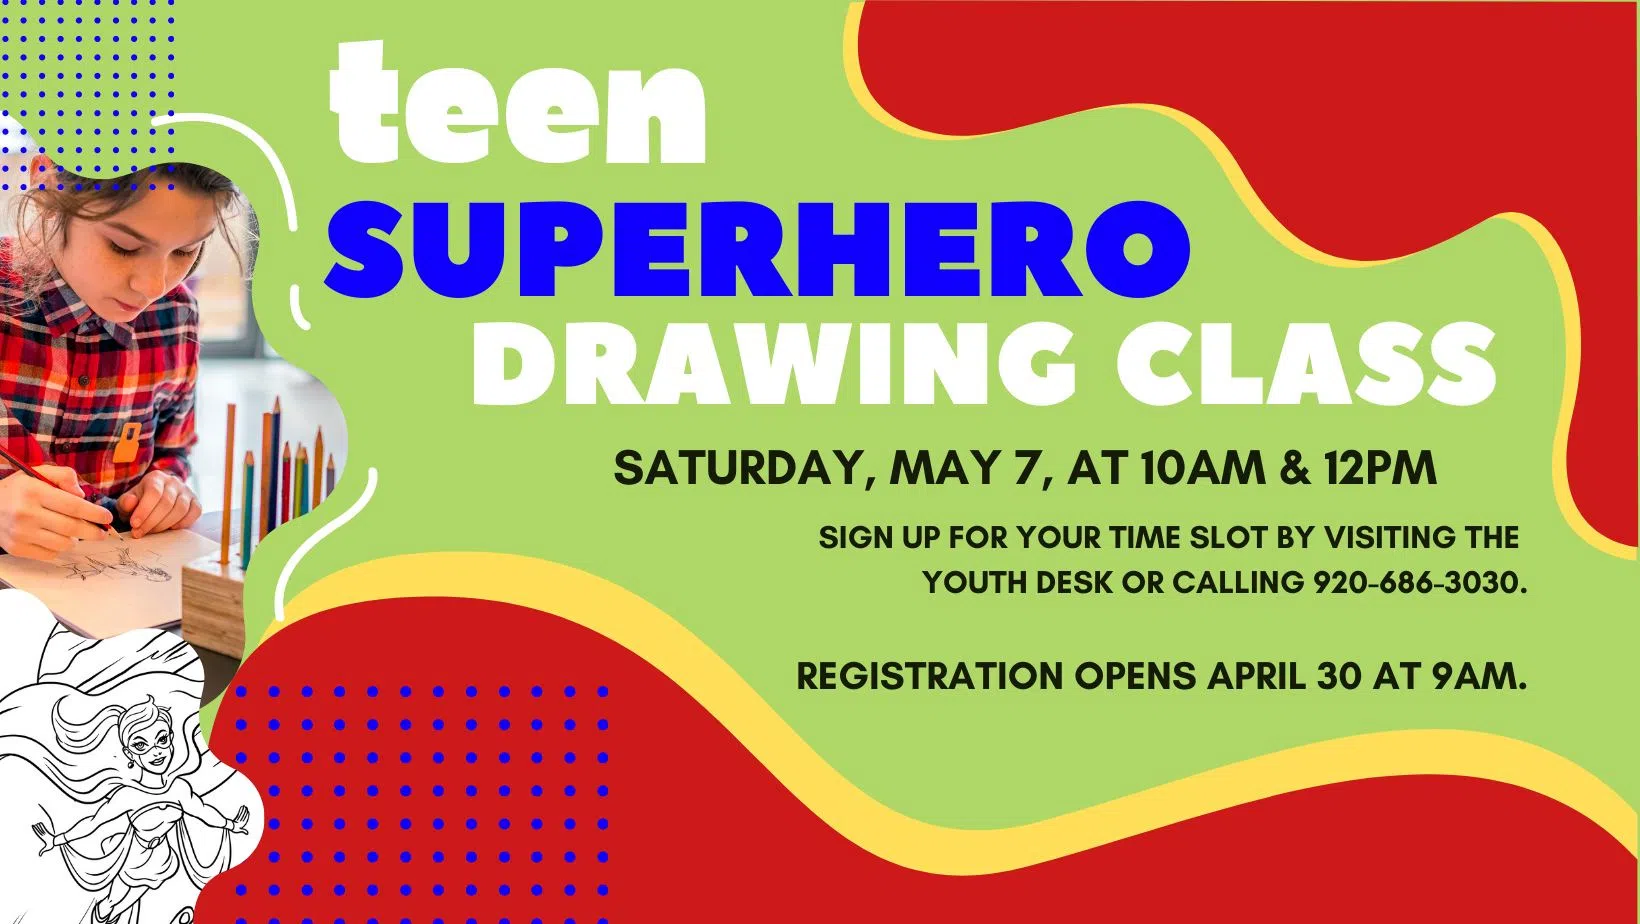 Manitowoc Public Library to Host Superhero Drawing Classes